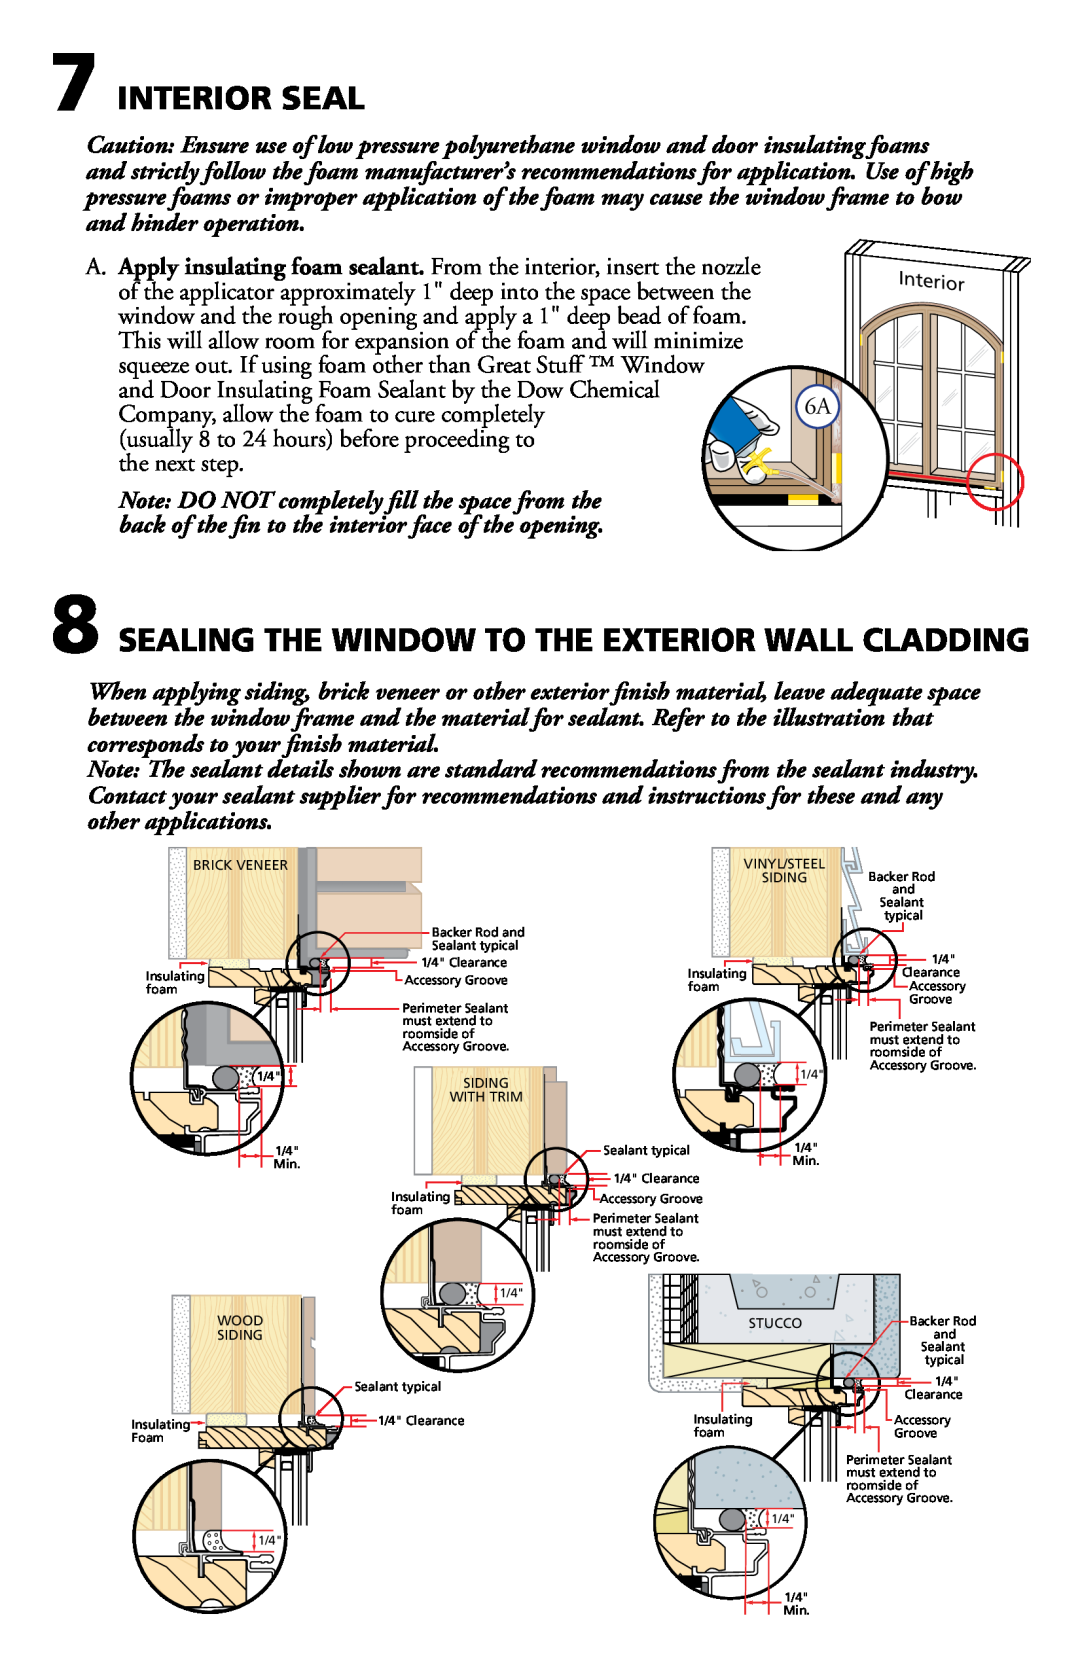 Pella 80GZ0102 installation instructions Interior Seal, Sealing The Window To The Exterior Wall Cladding 